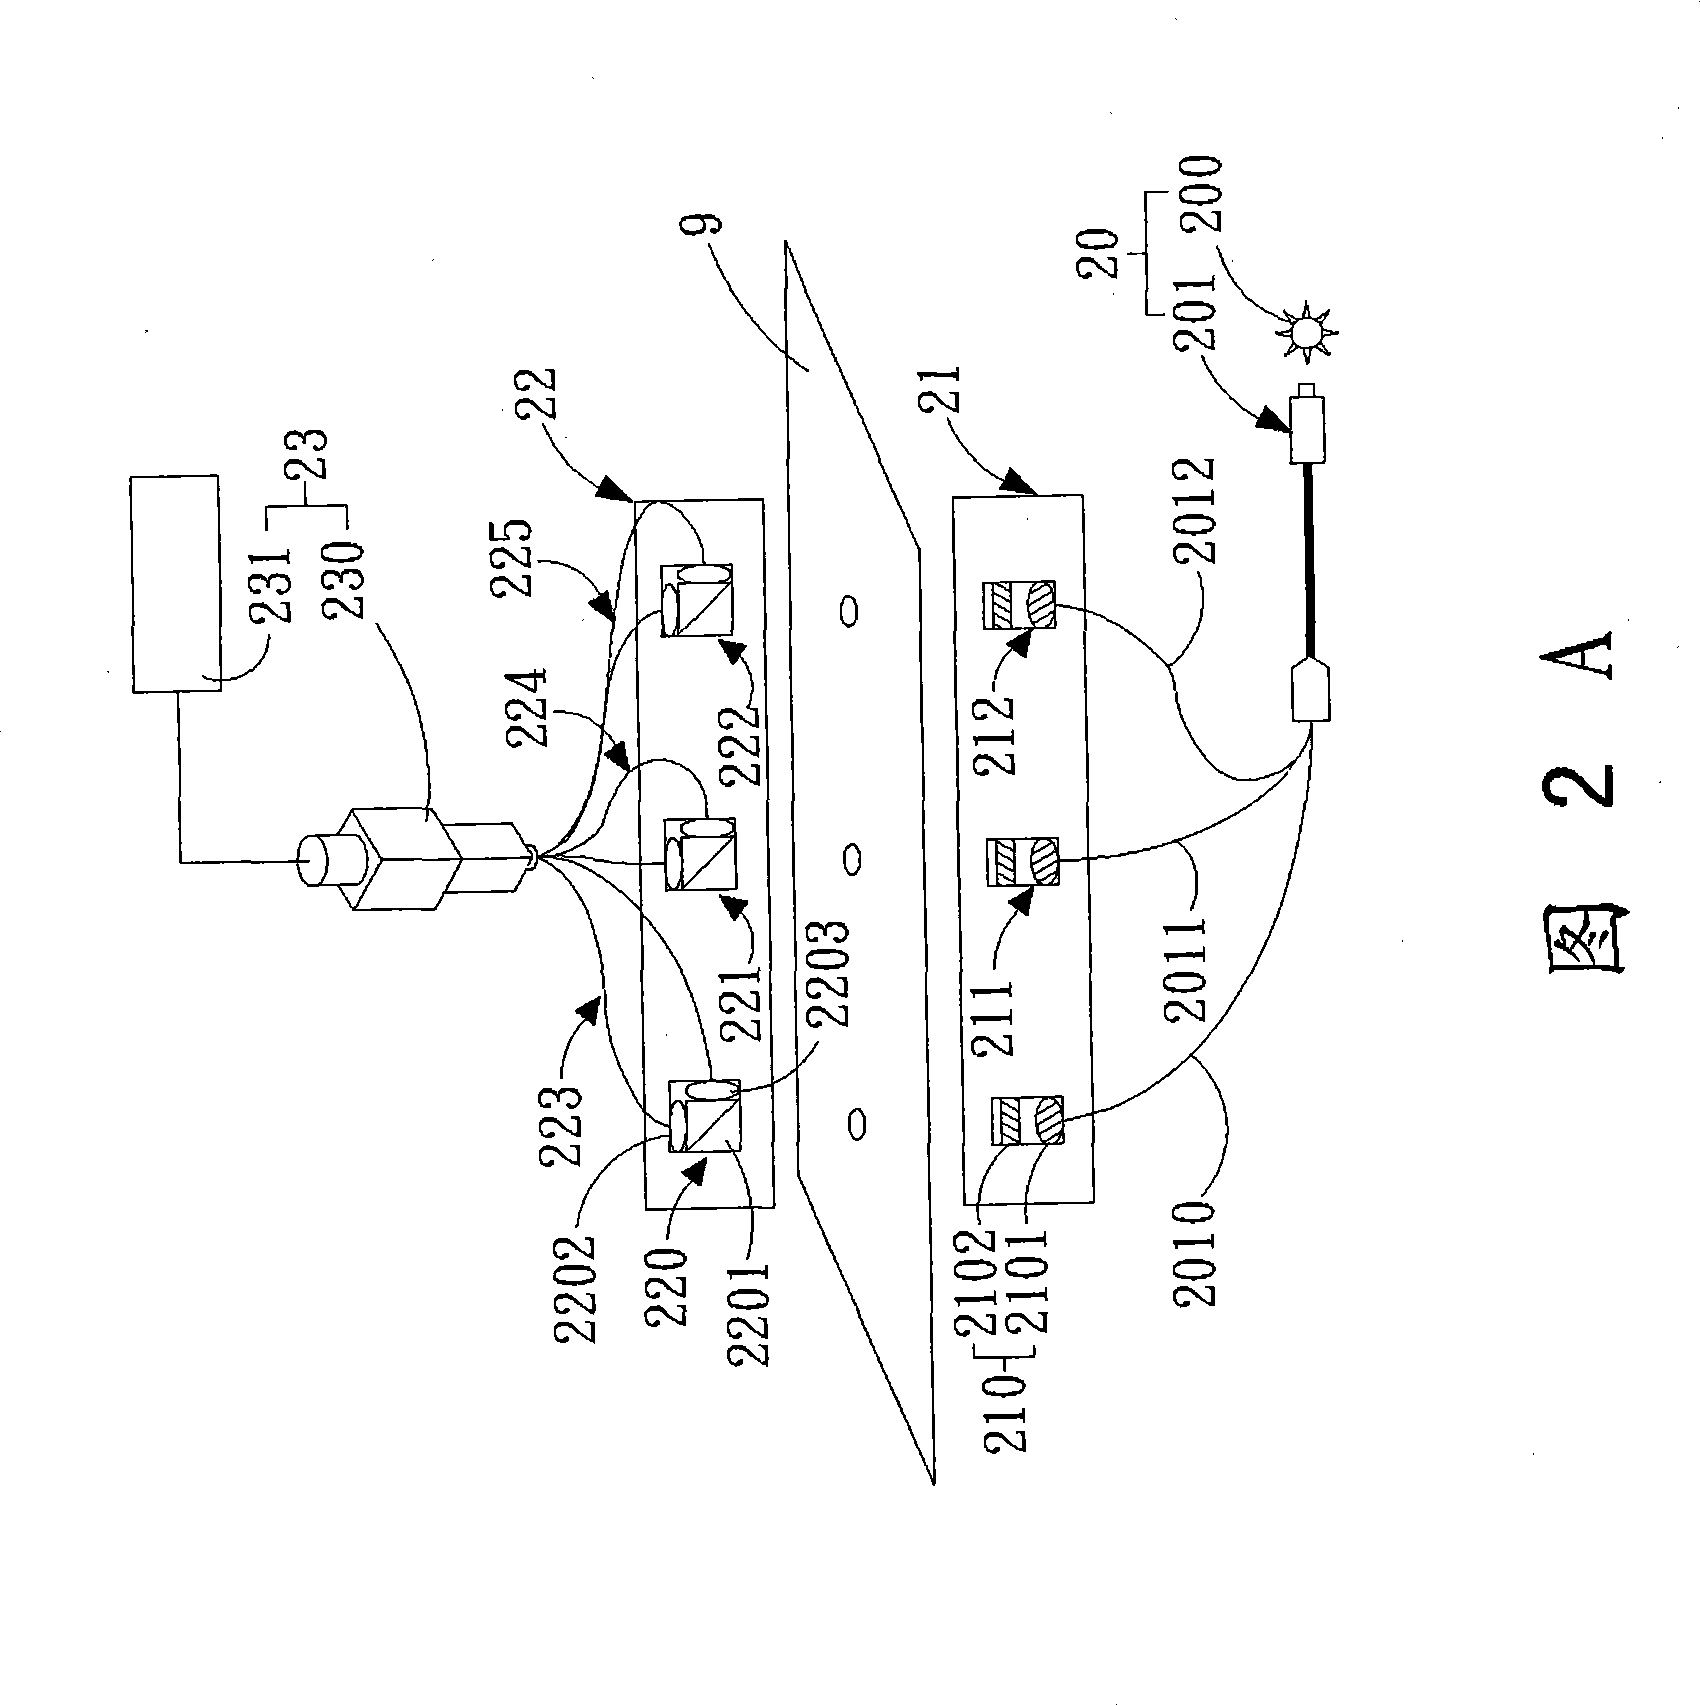 Multi-channel spectral measuring device and phase difference analysis method